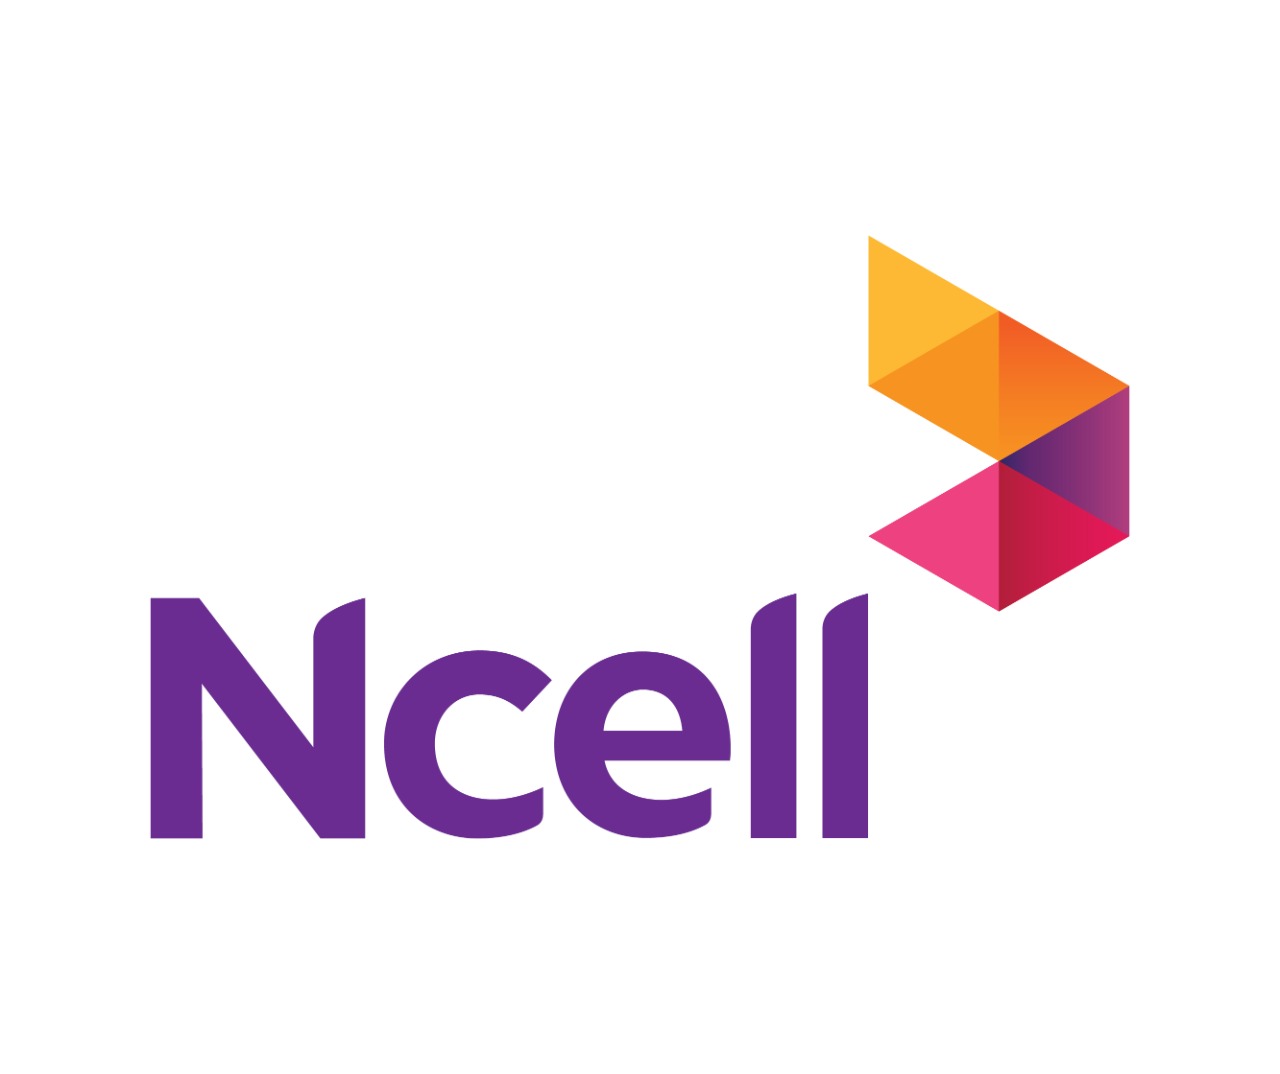 80% Ncell stake, initially at 1.04 trillion, sells for Rs 6.06 billion amid tax evasion suspicions involving PM Dahal